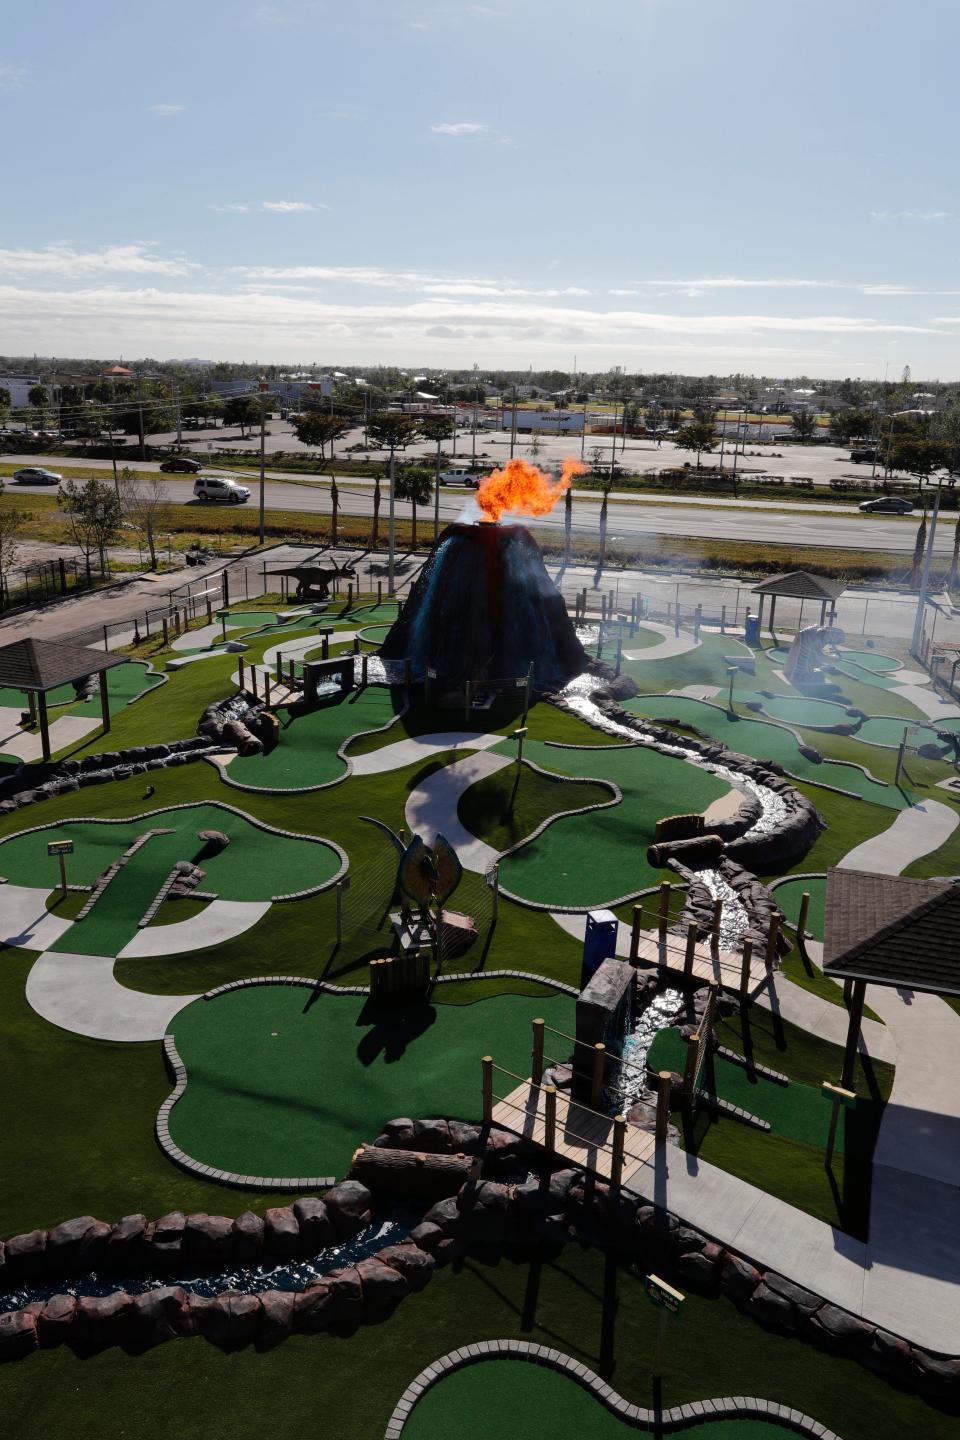 Cape Coral's Gator Mike's Family Fun Park opened Dinosaur Falls Mini Golf, an Orlando-style tourist attraction, on Dec. 29, 2022. It features 19 holes of golf; nine moving, roaring animatronic dinosaurs; three waterfalls; and a 30-foot "volcano" spewing fireballs into the sky.